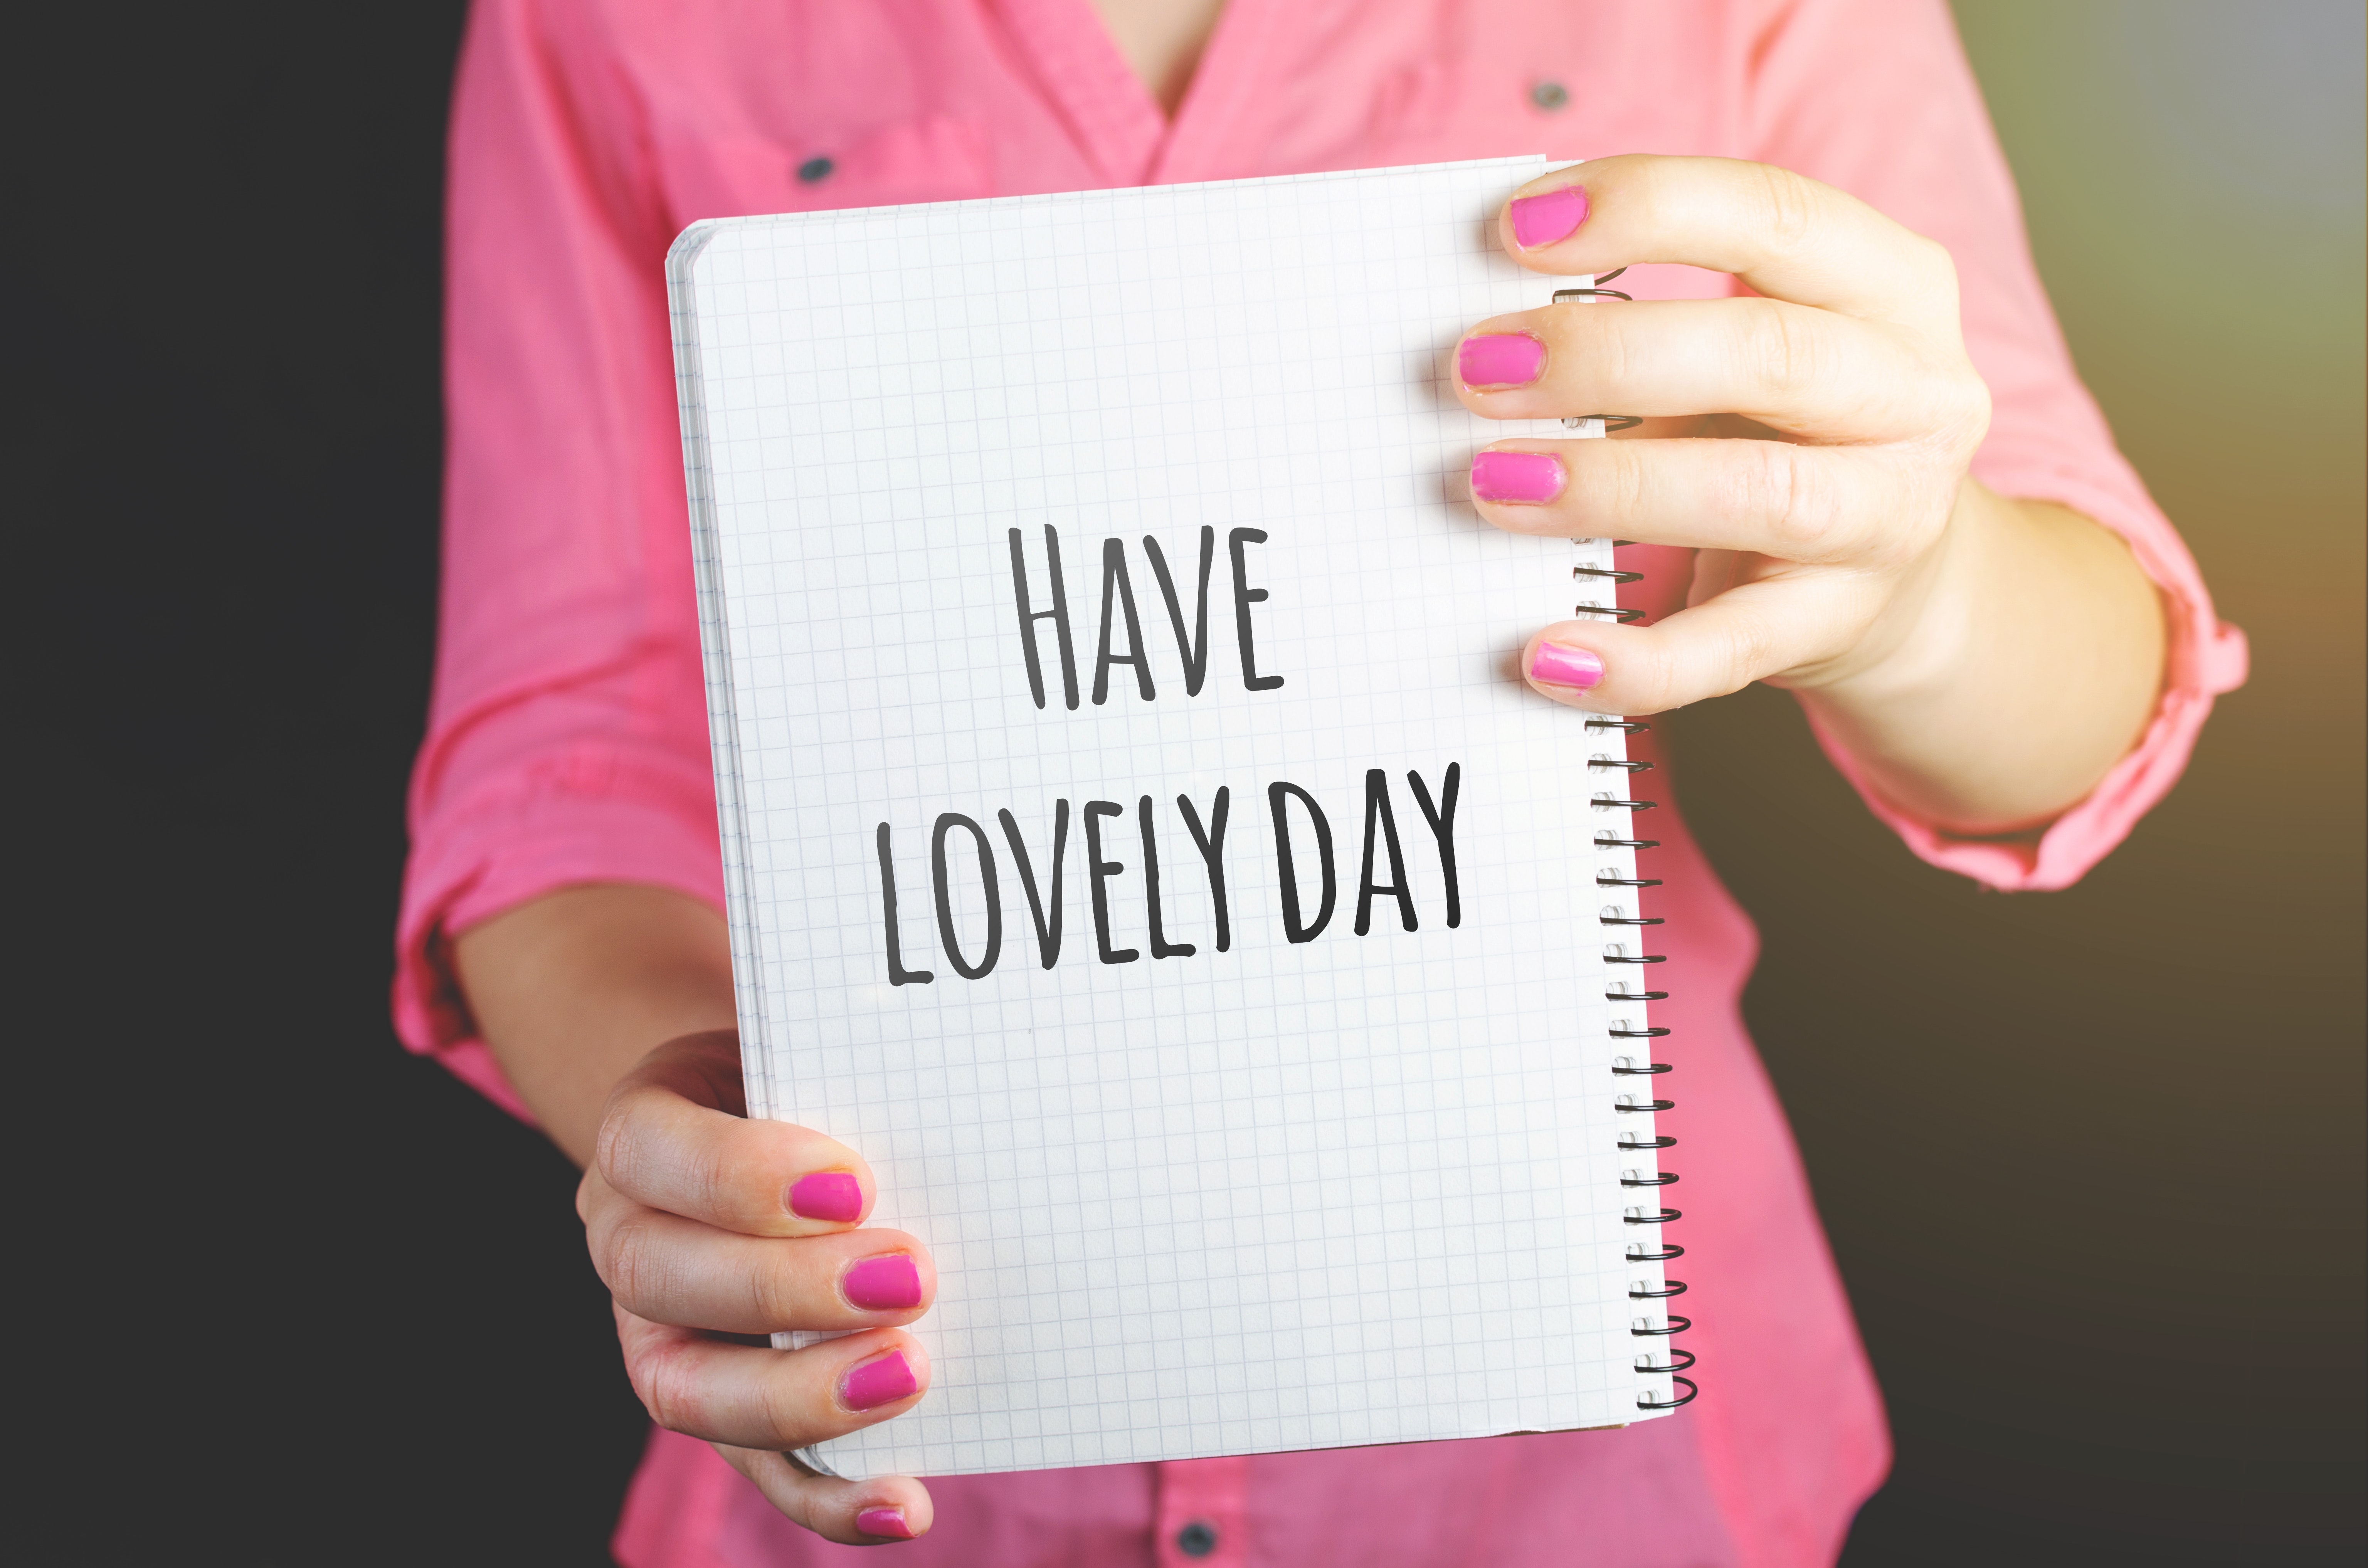 Woman Wearing Pink Dress Holding Graphing Notebook With Have a Lovely Day Sign, Ad, Notebook, Woman, Text, HQ Photo